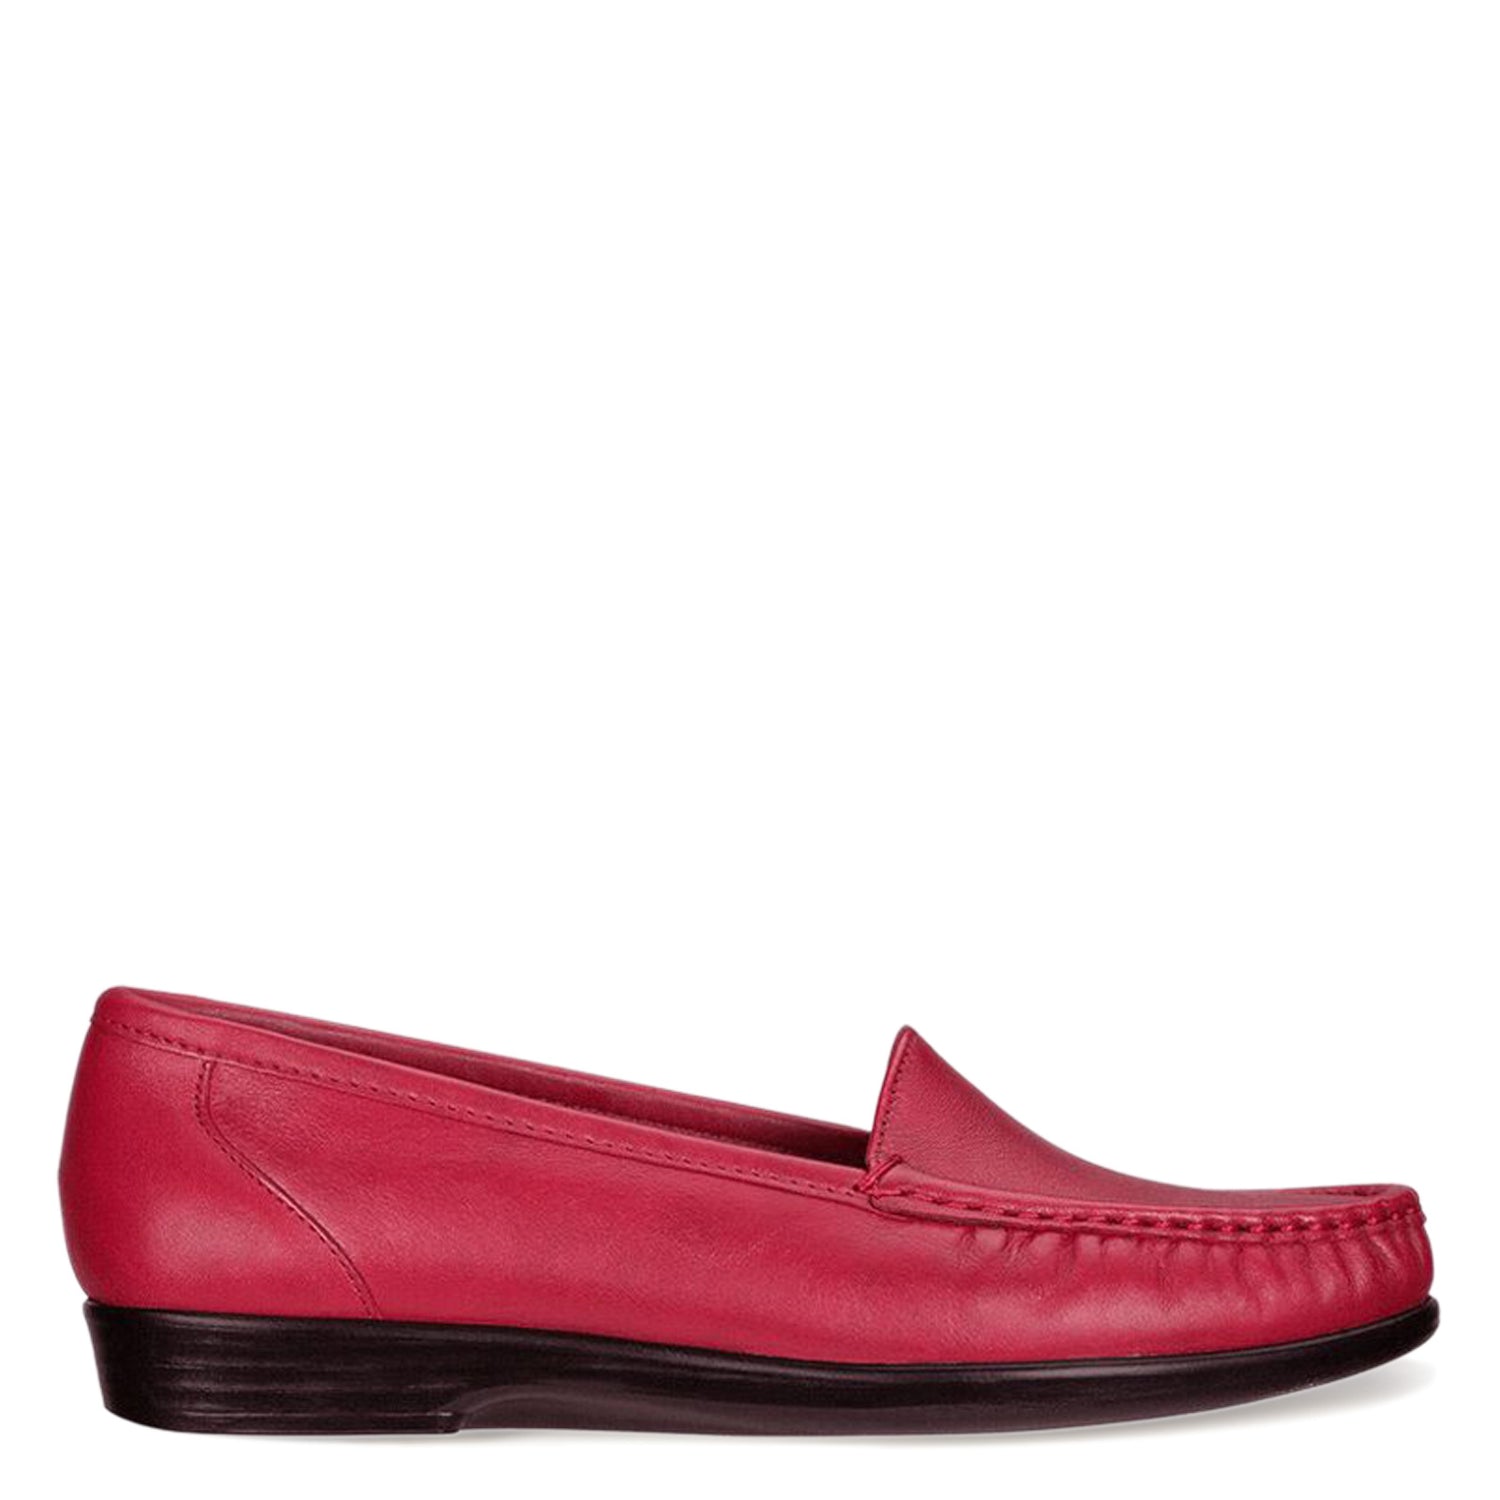 Peltz Shoes  Women's SAS Simplify Loafer RED SIMPLIFY RED